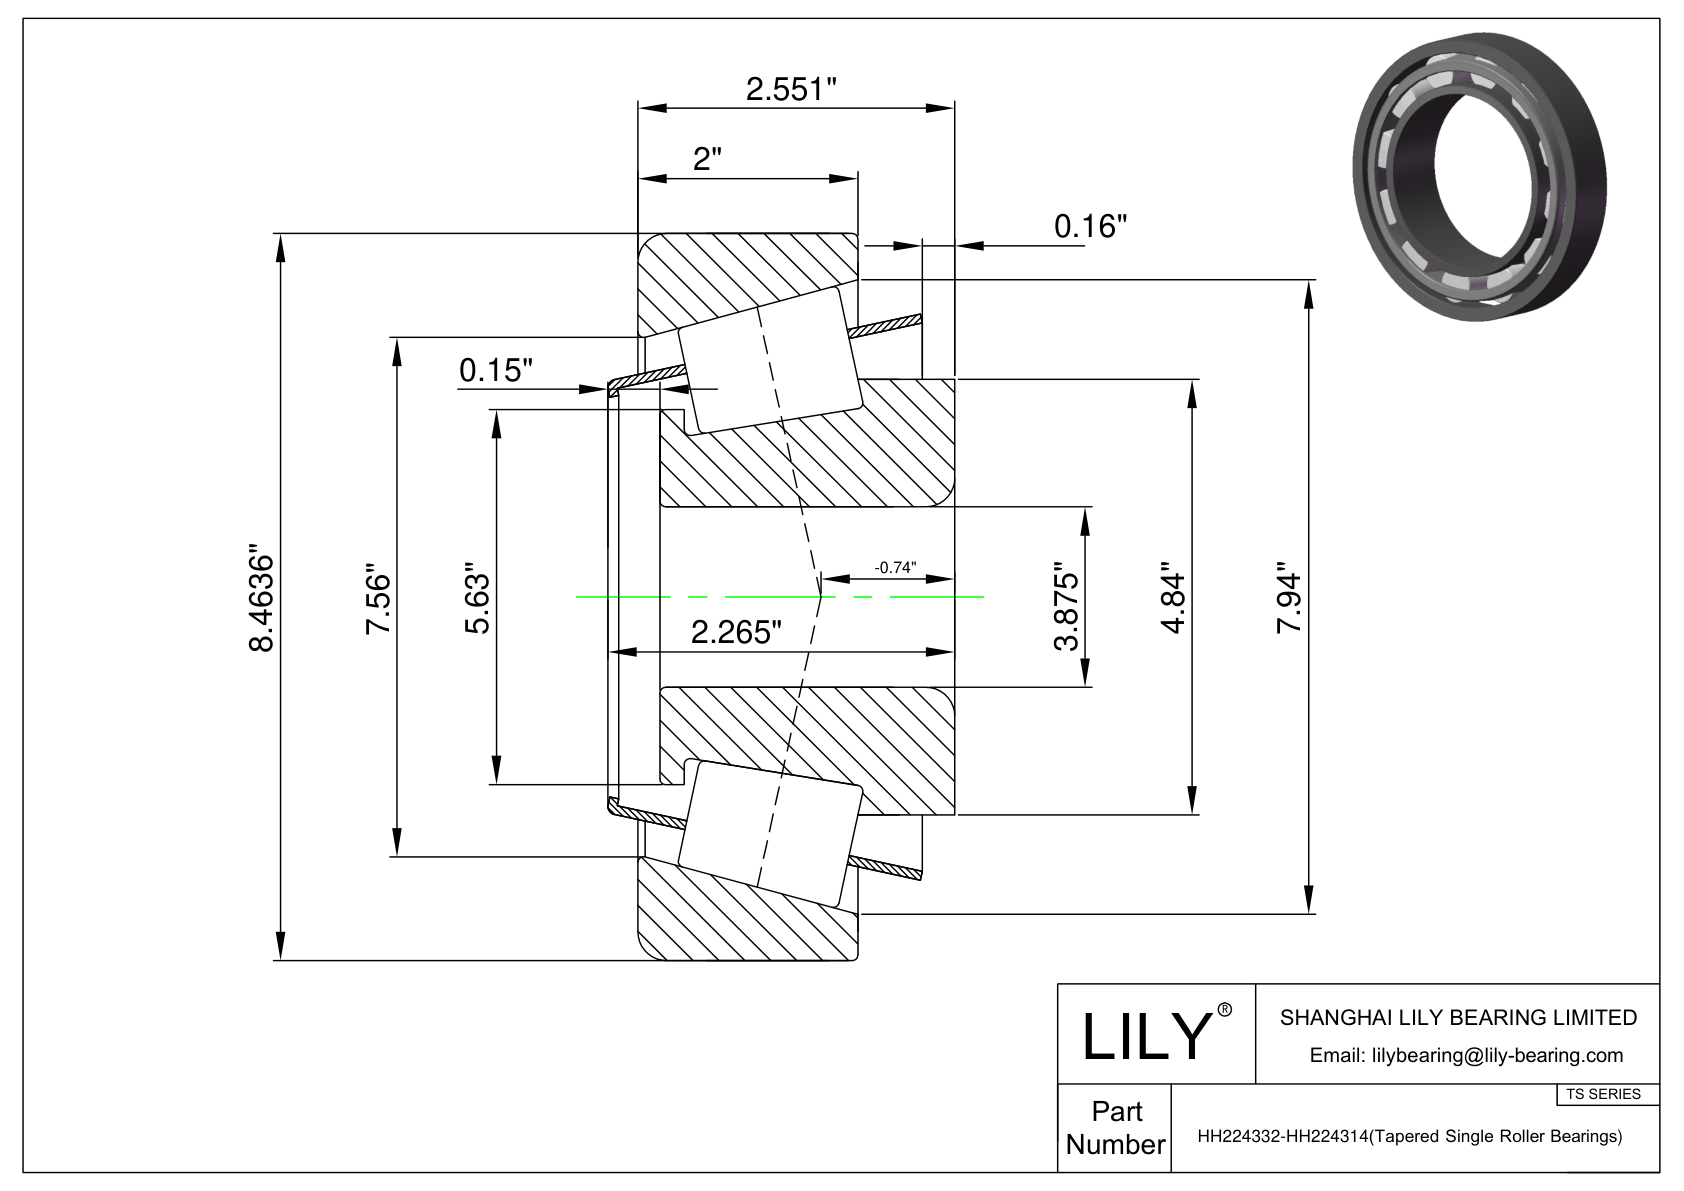 HH224332-HH224314 TS (Tapered Single Roller Bearings) (Imperial) cad drawing